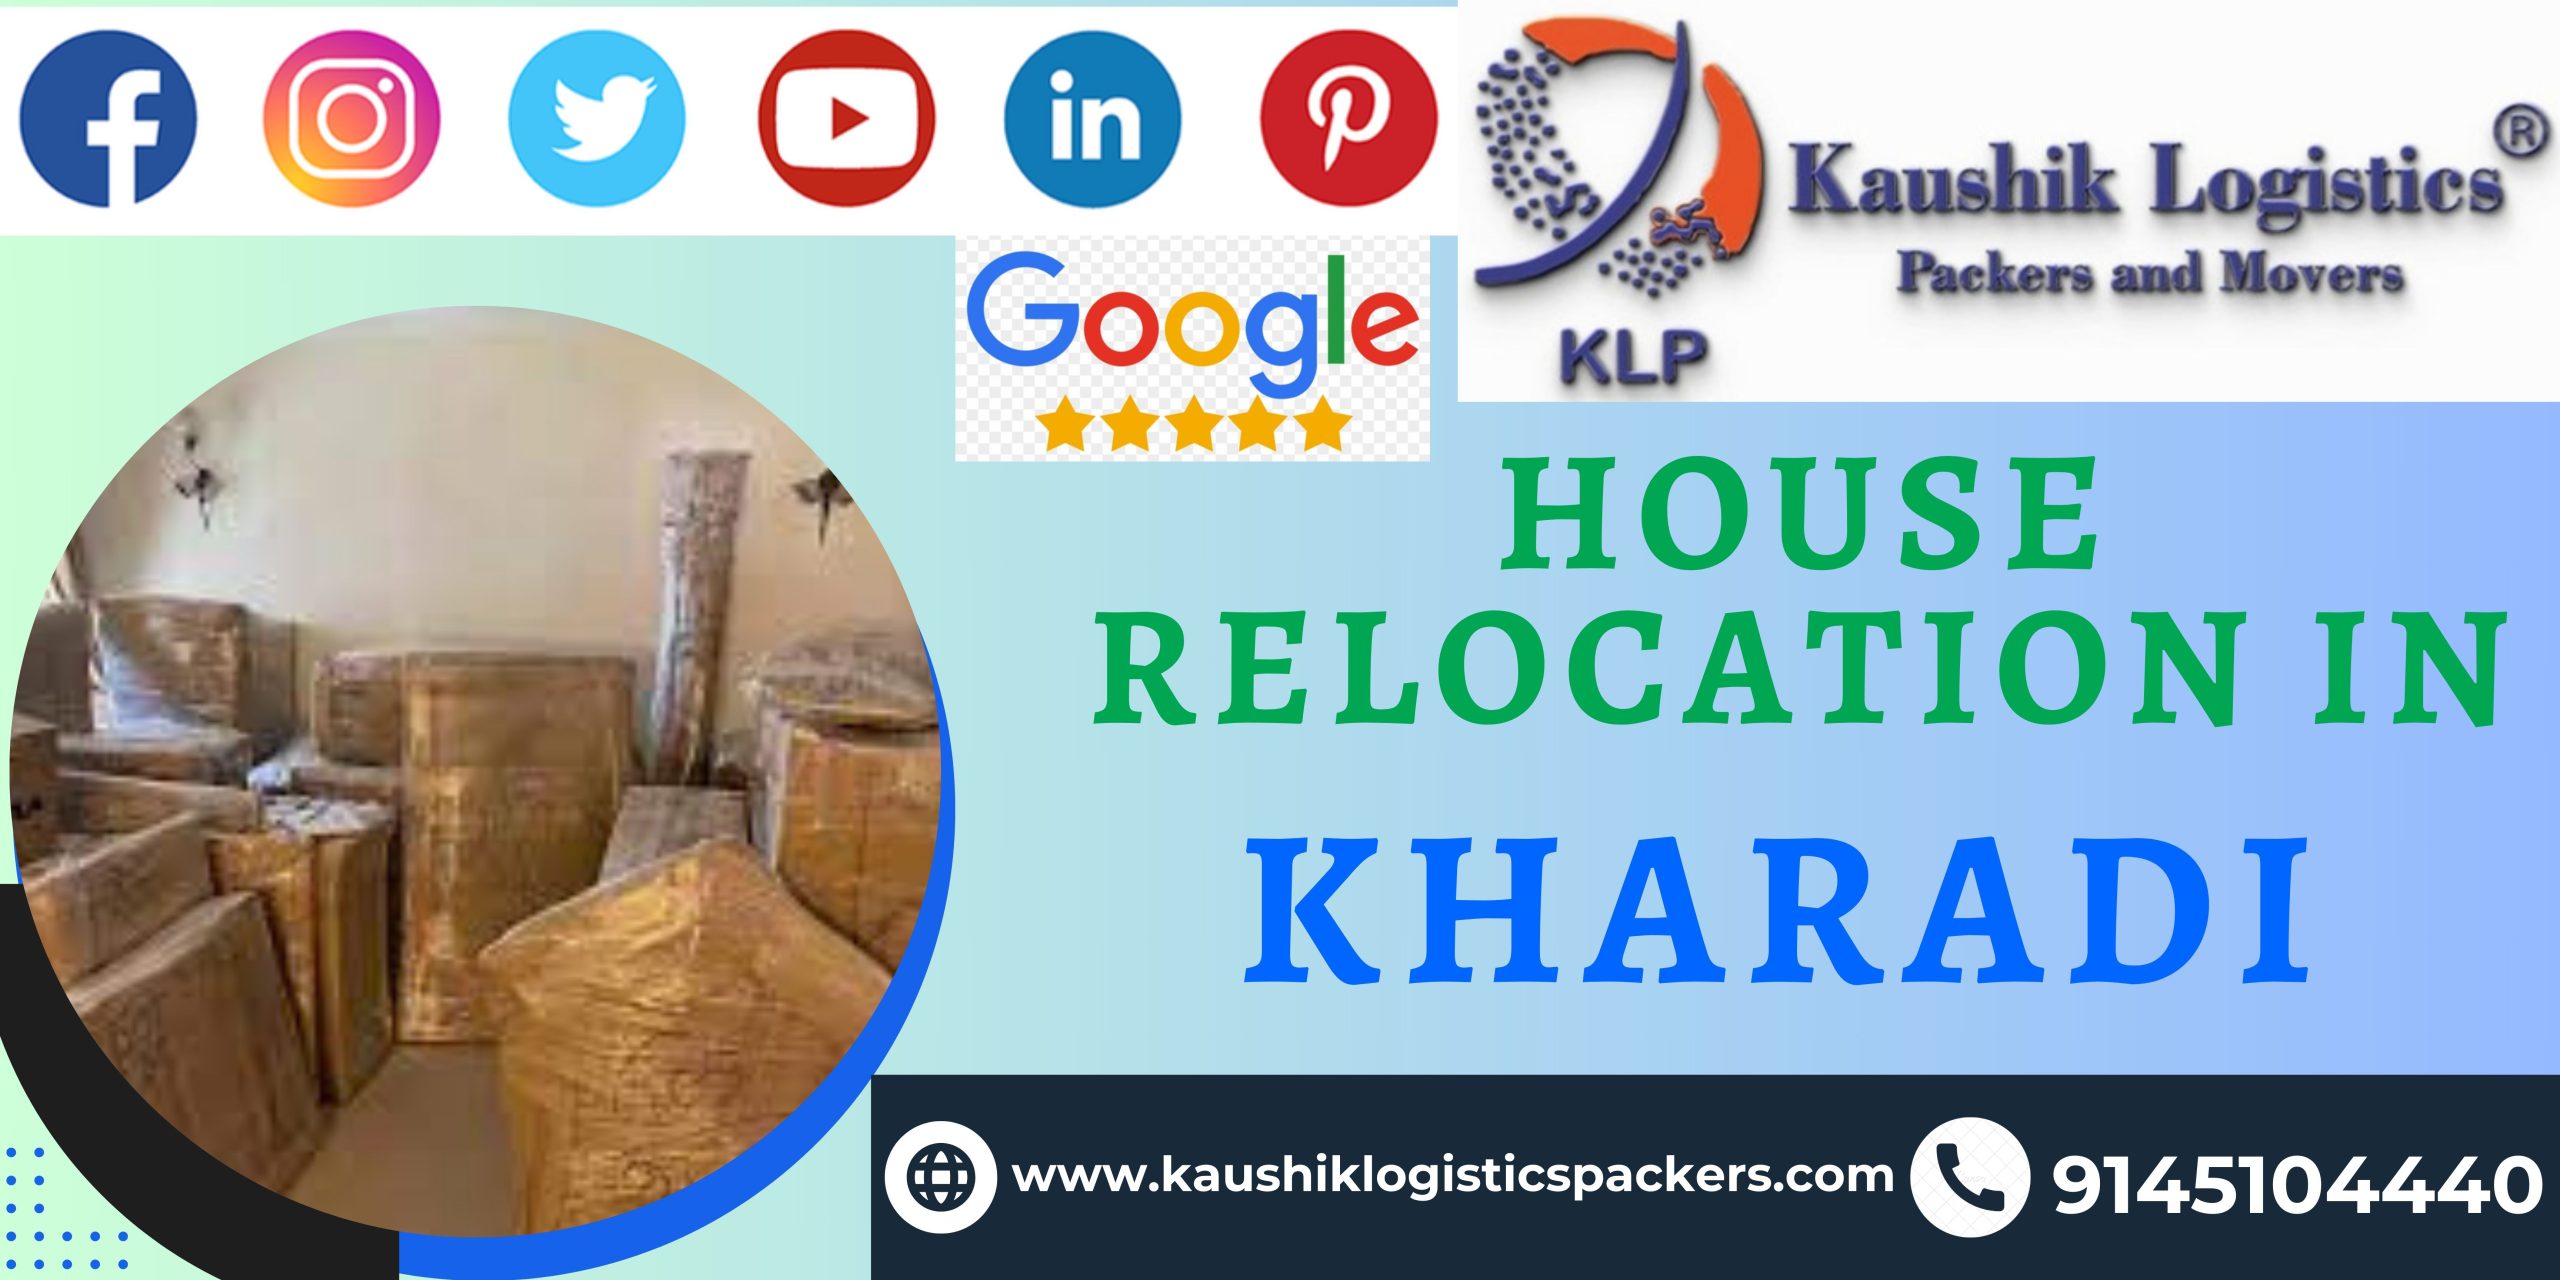 Packers and Movers In Kharadi